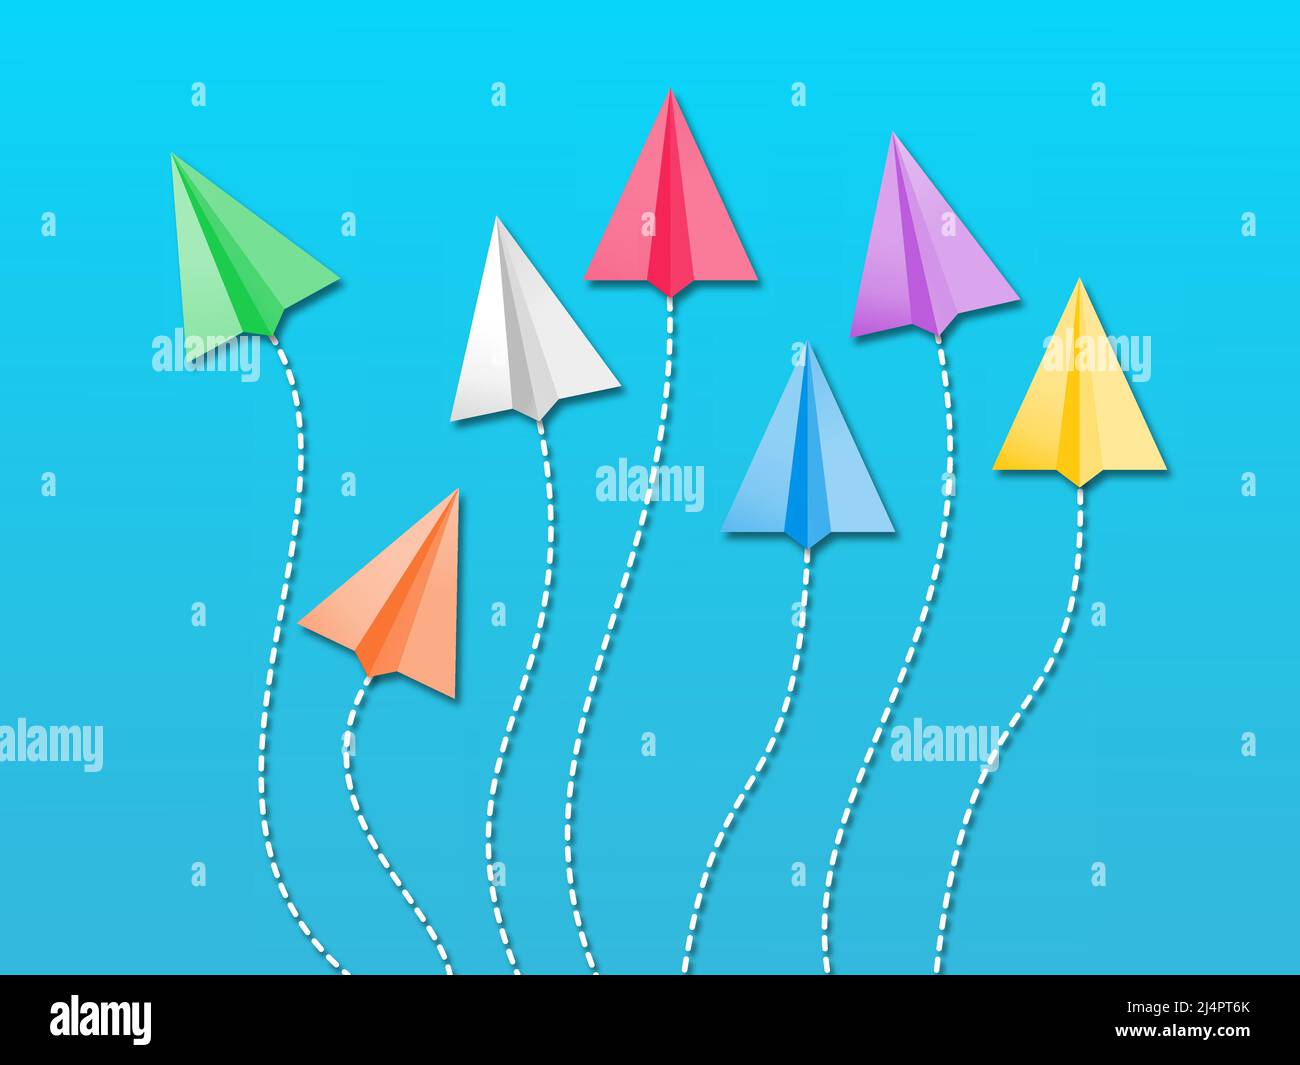 Diversity concept vector illustration. Colorful paper planes flying randomly viewed from top on blue background. Stock Vector